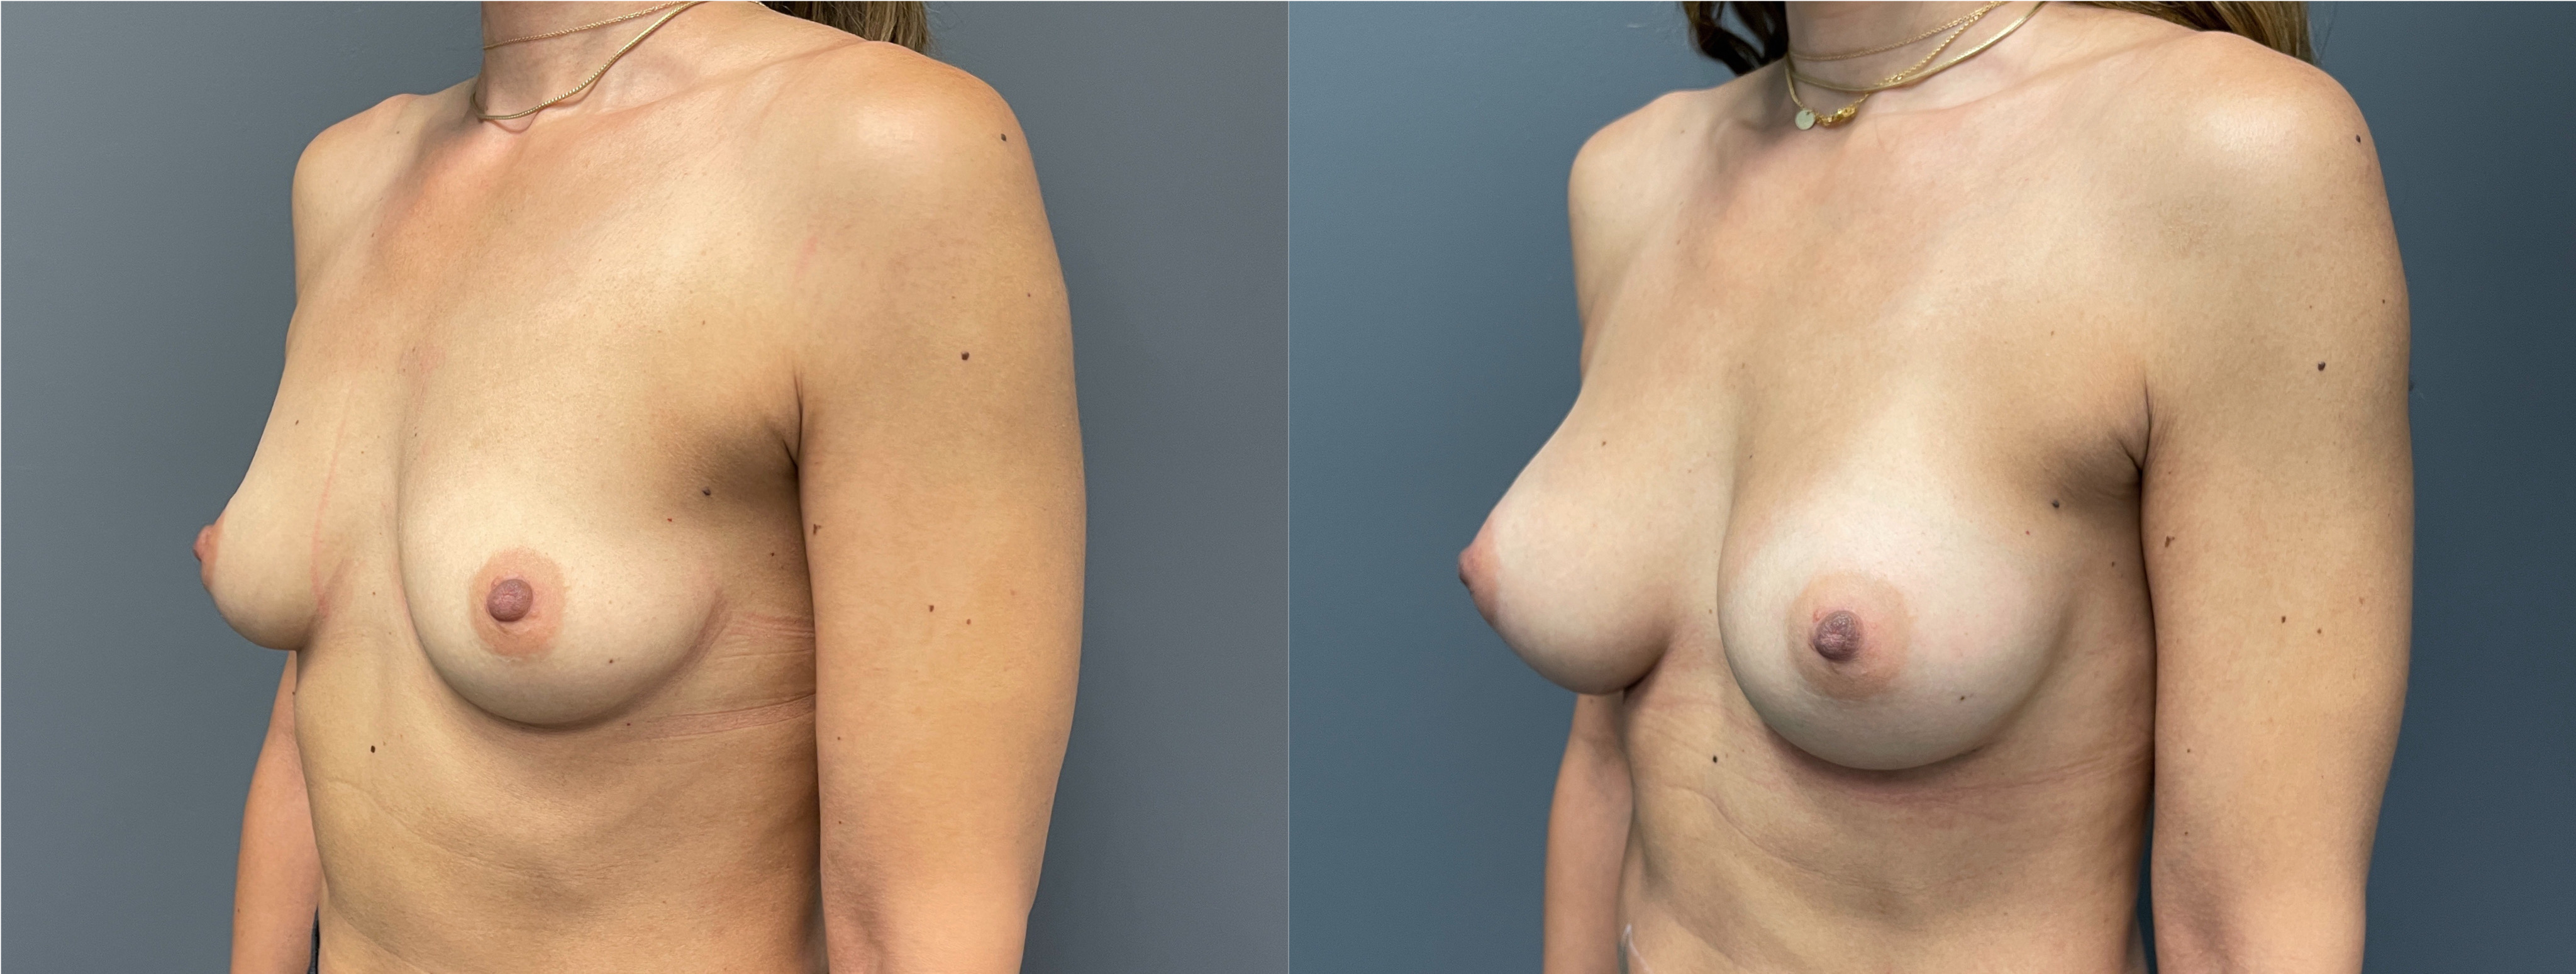 Breast Augmentation Before and After | Dr. Maura Reinblatt